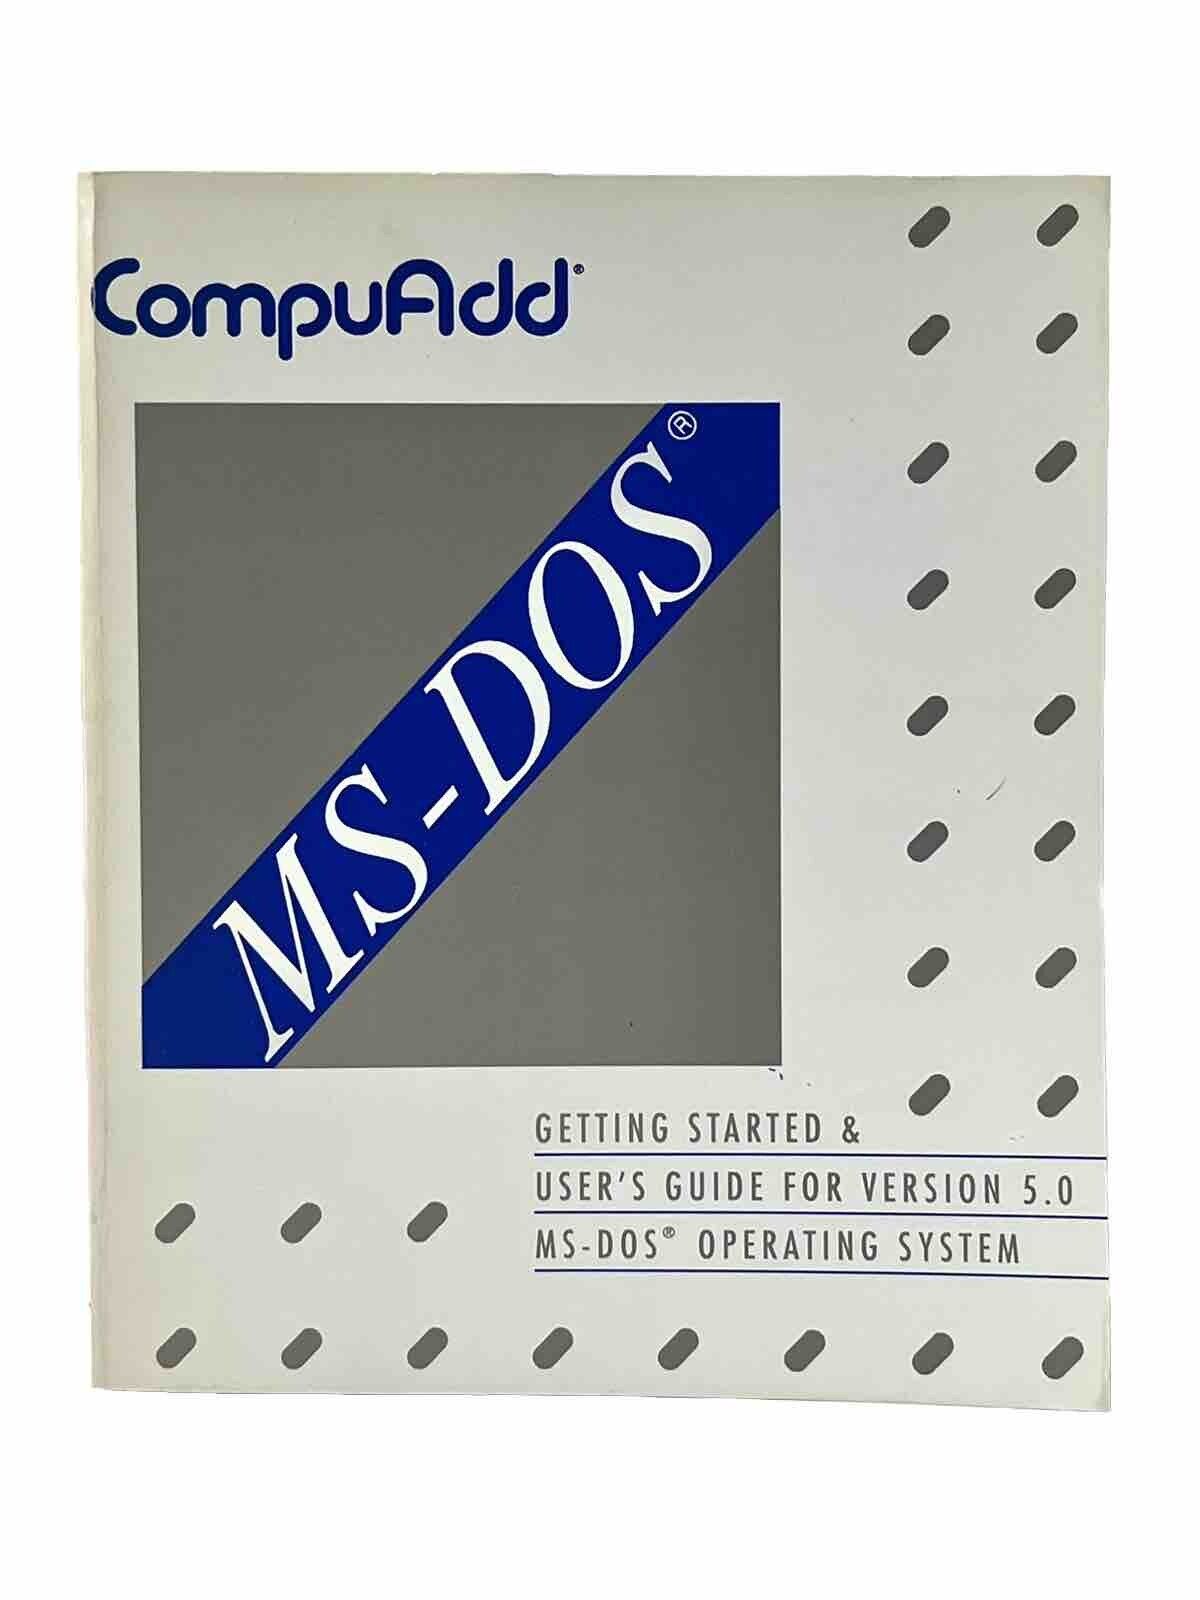 Vintage CompuAdd Microsoft MS-DOS Getting Started User’s Guide 1991